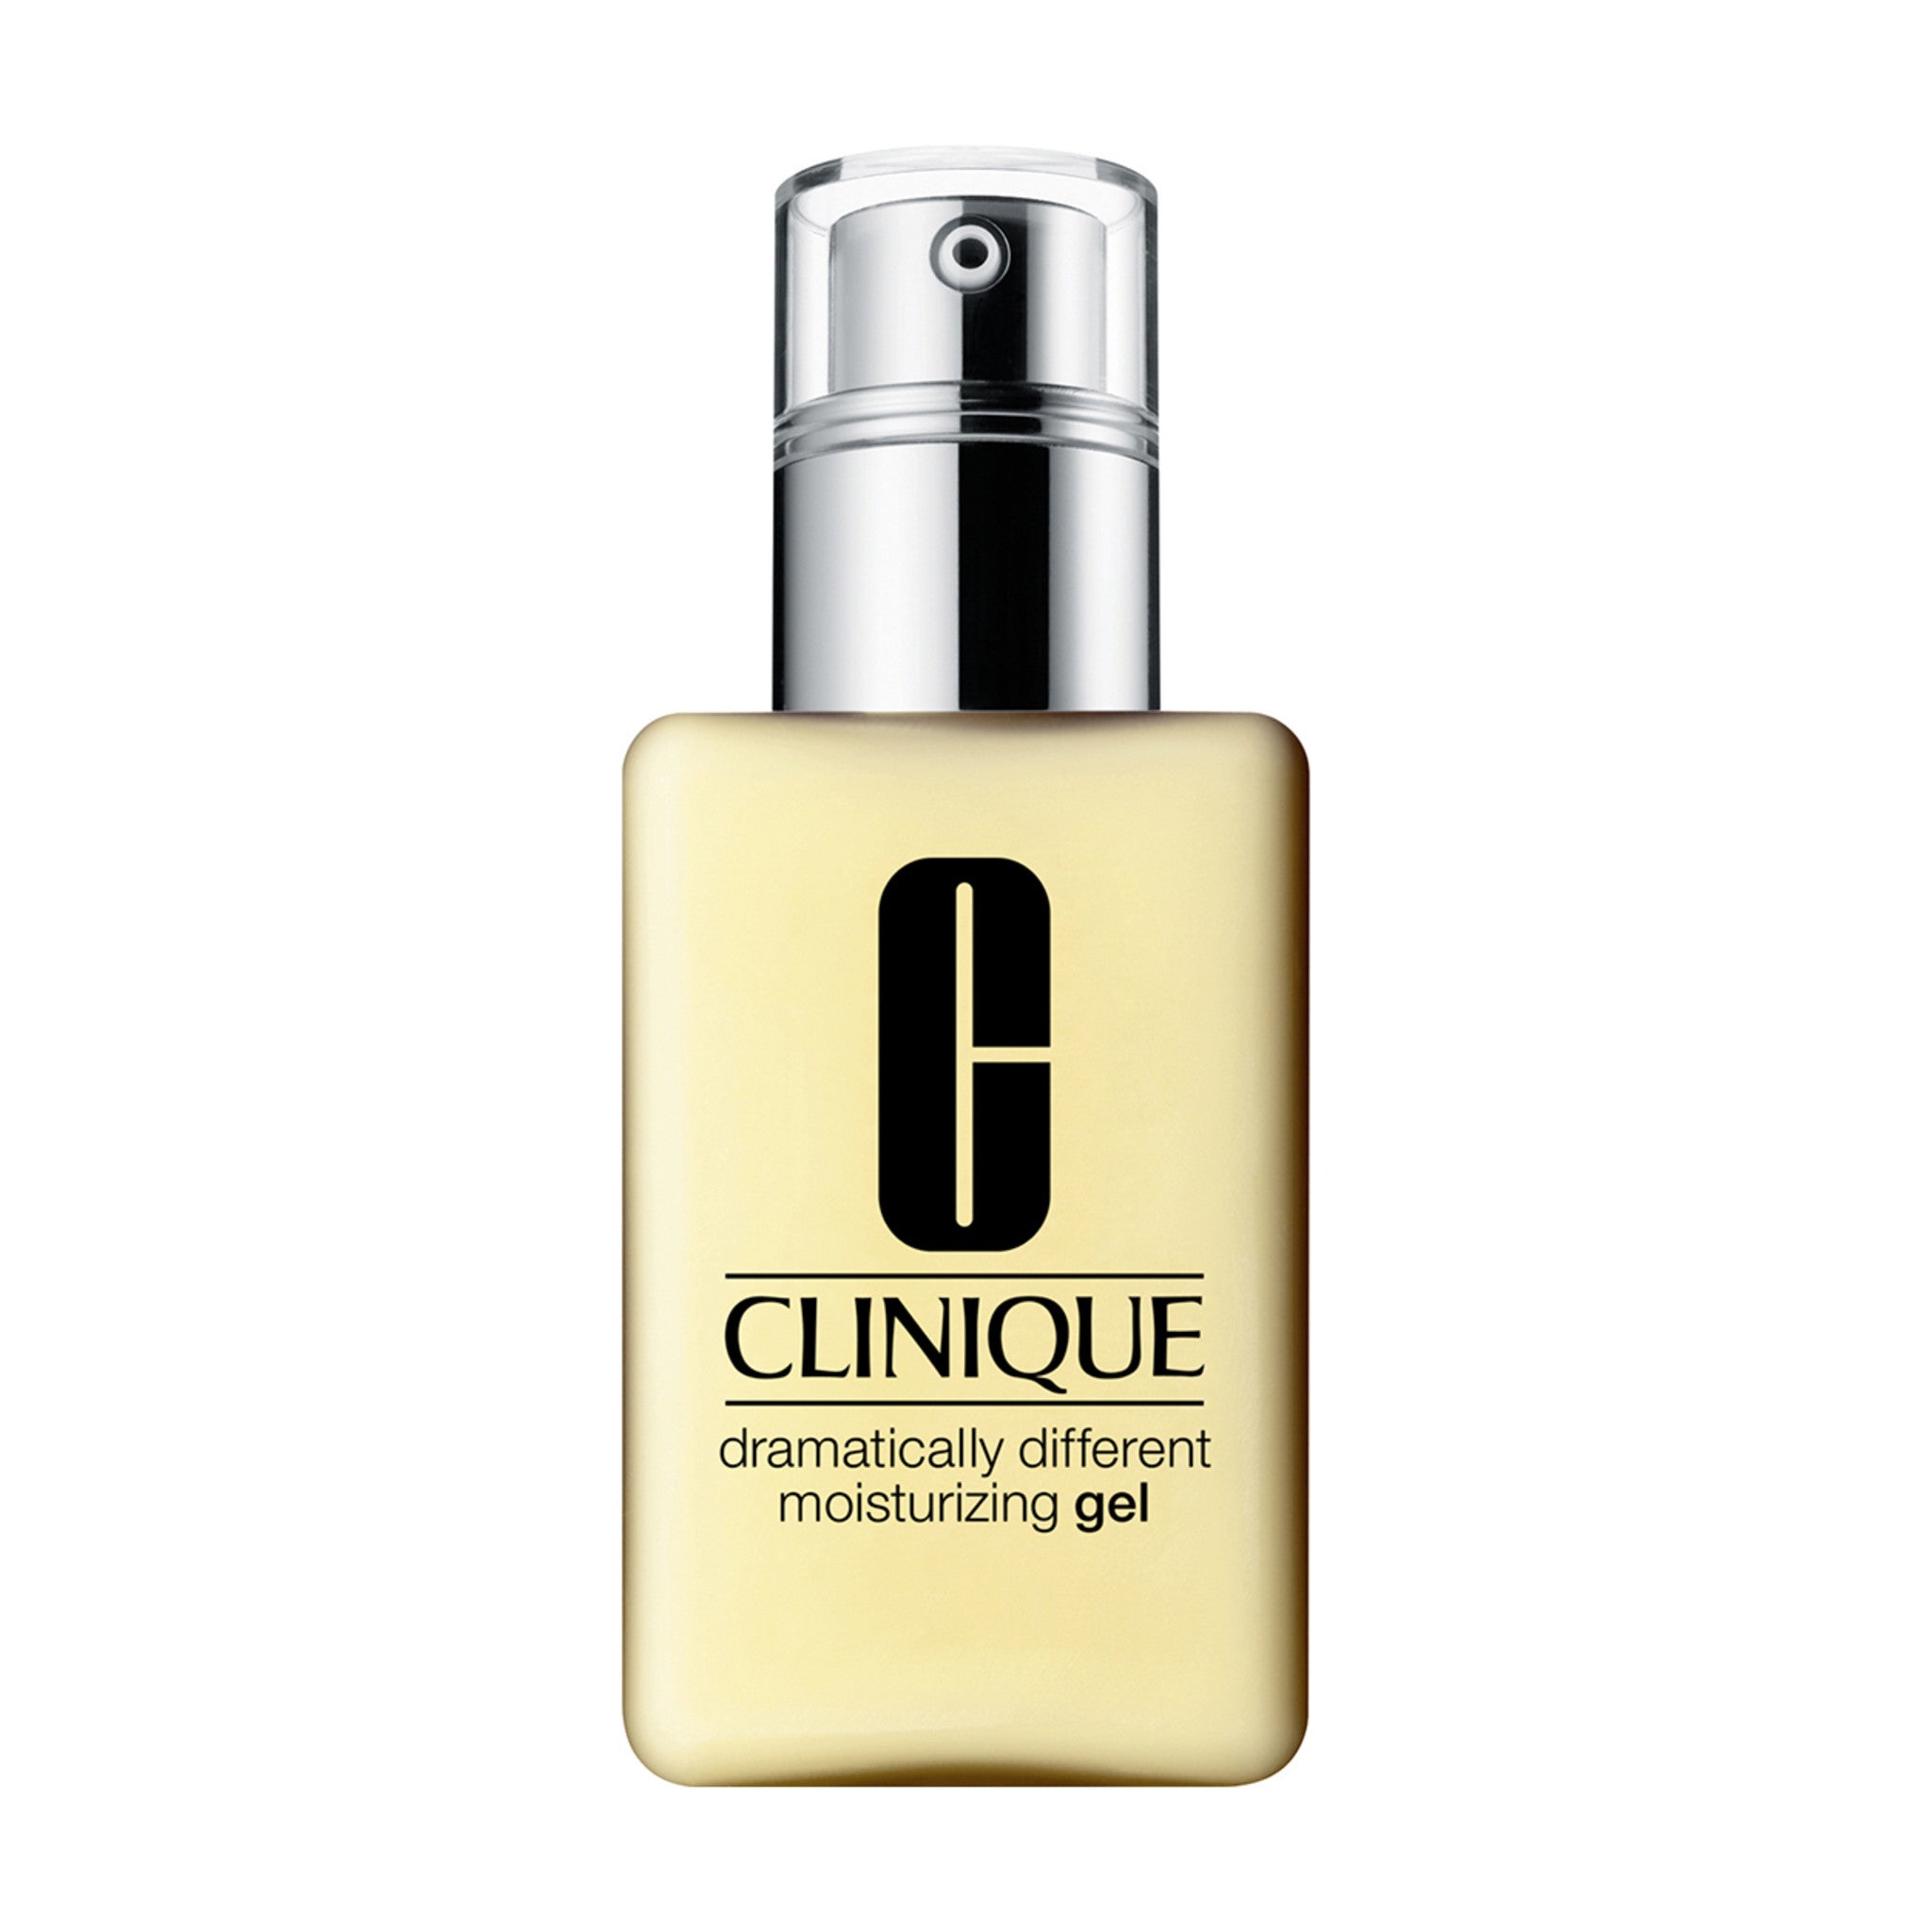 Clinique Dramatically Different Moisturizing Gel Size variant: 4.2 OZ